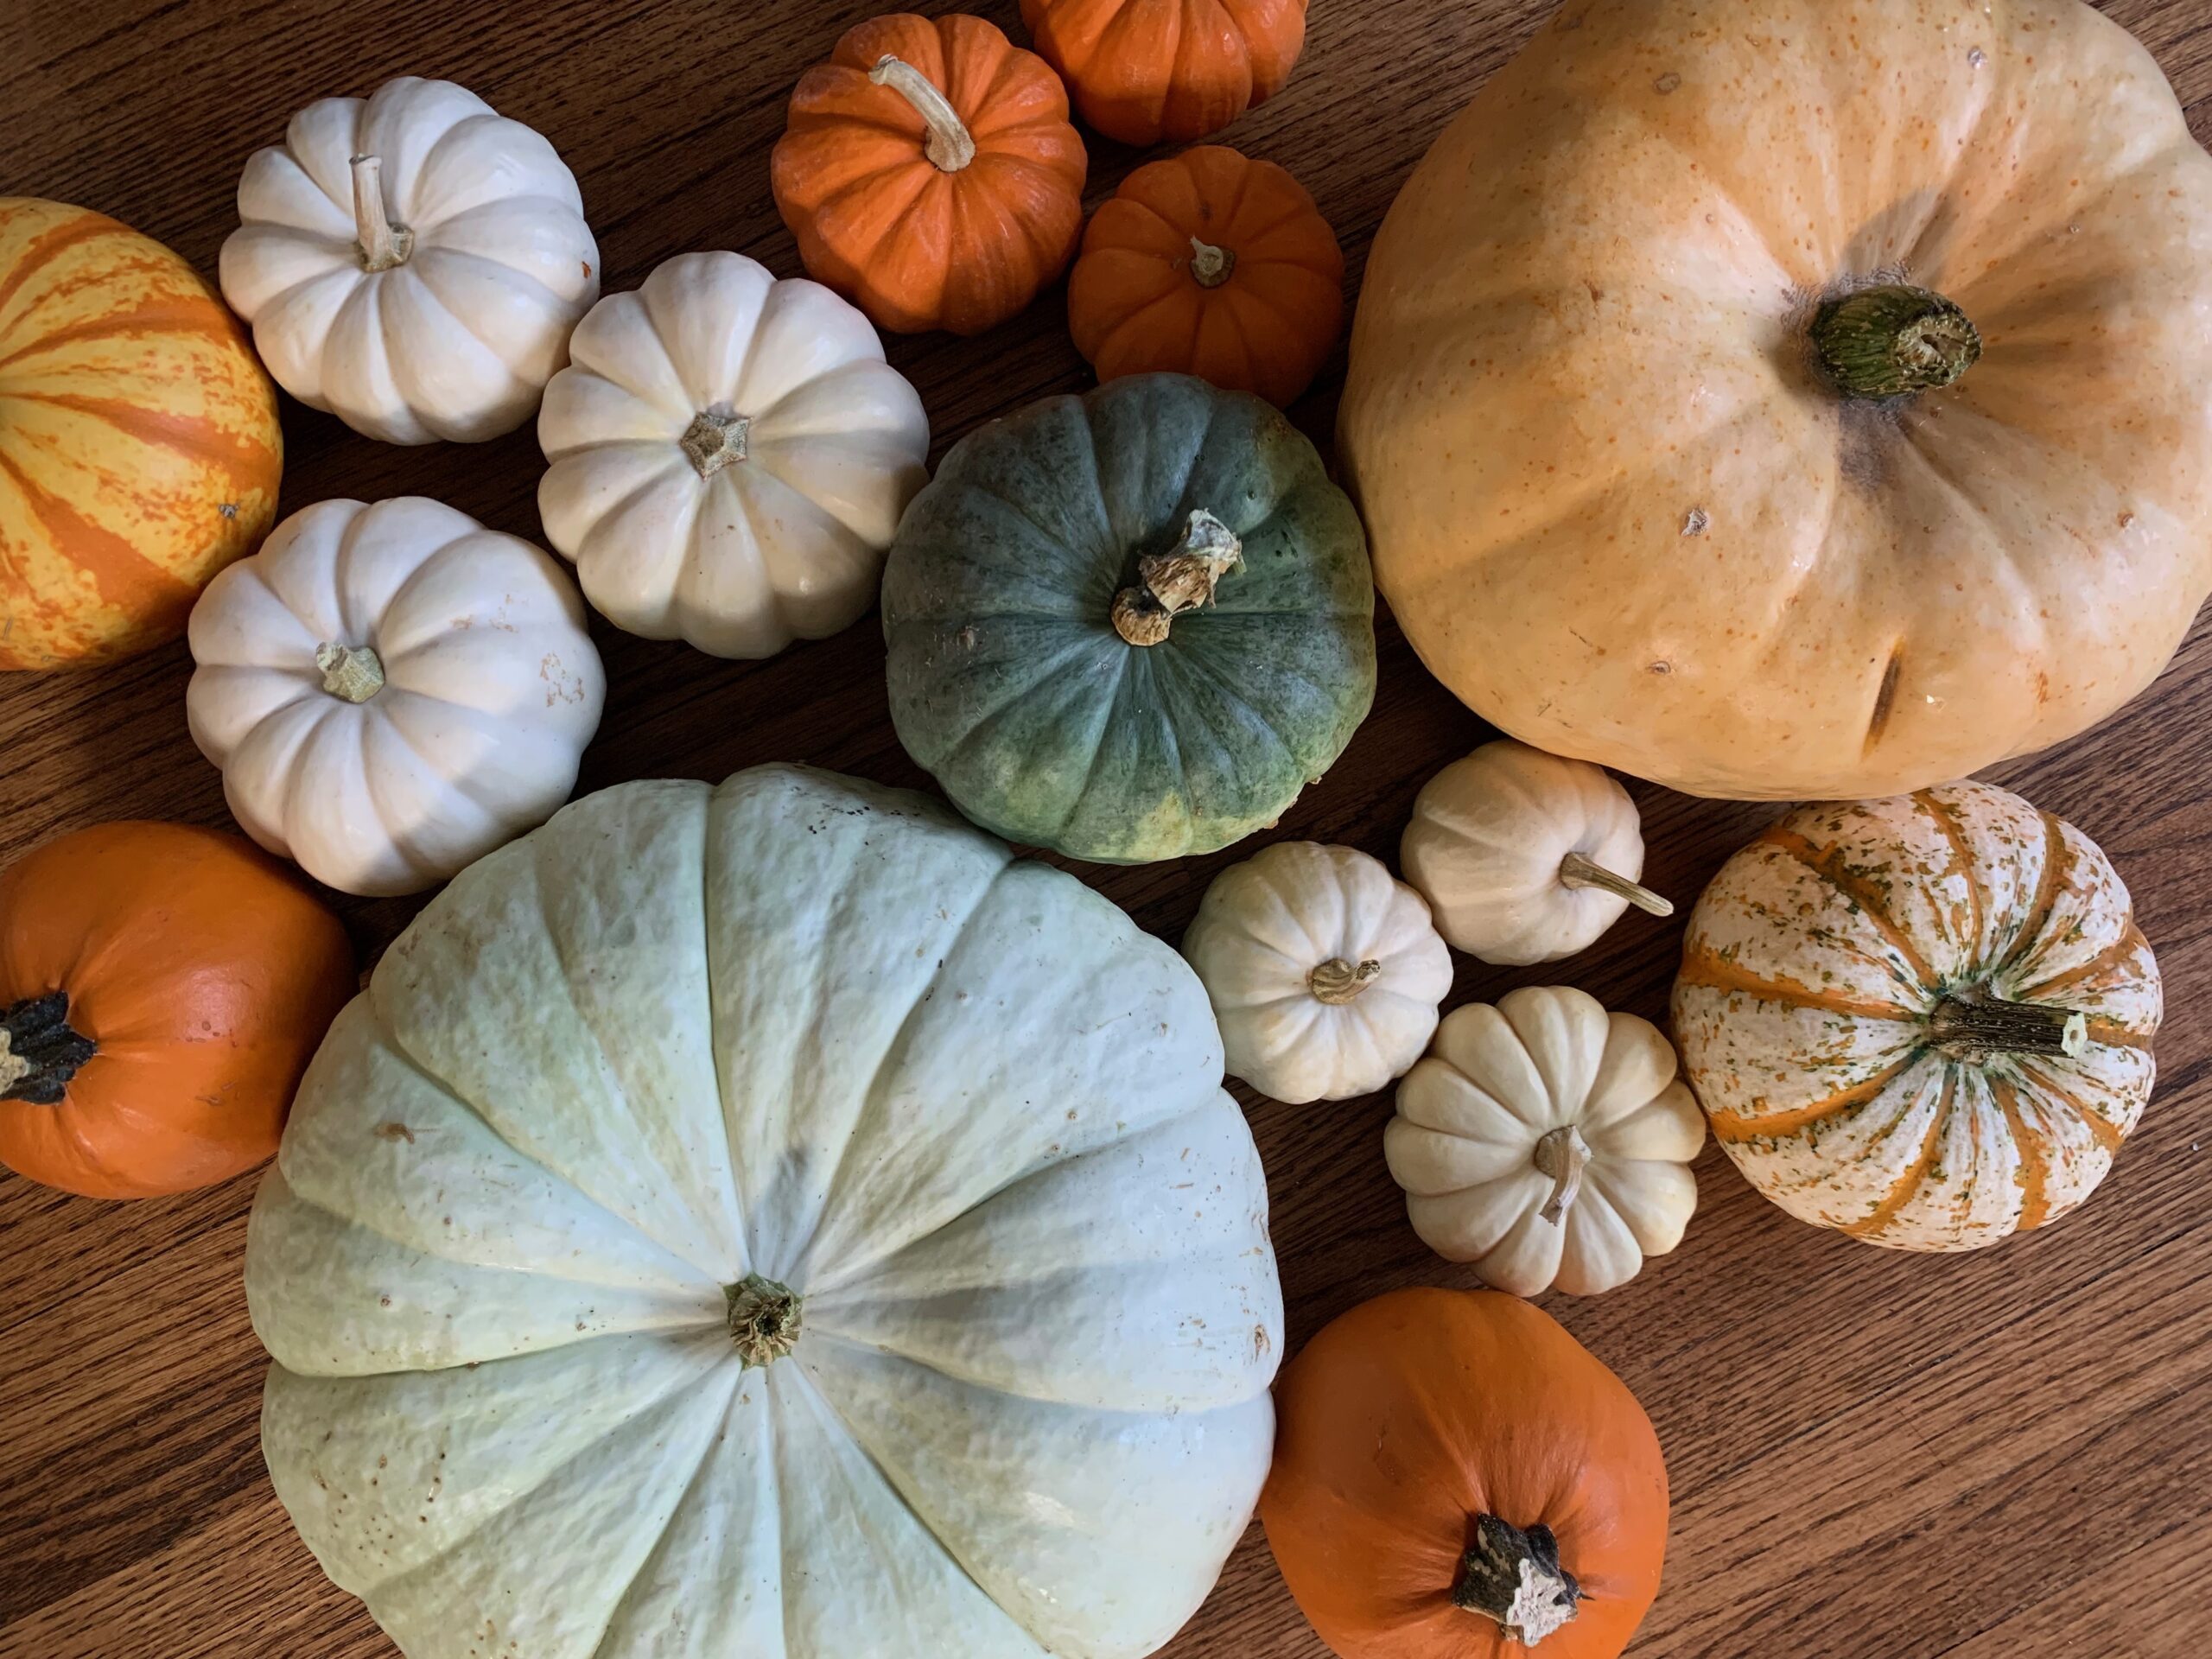 A variety of pumpkins in white, orange, and green, ready to be made into Thanksgiving centrepieces with flowers.